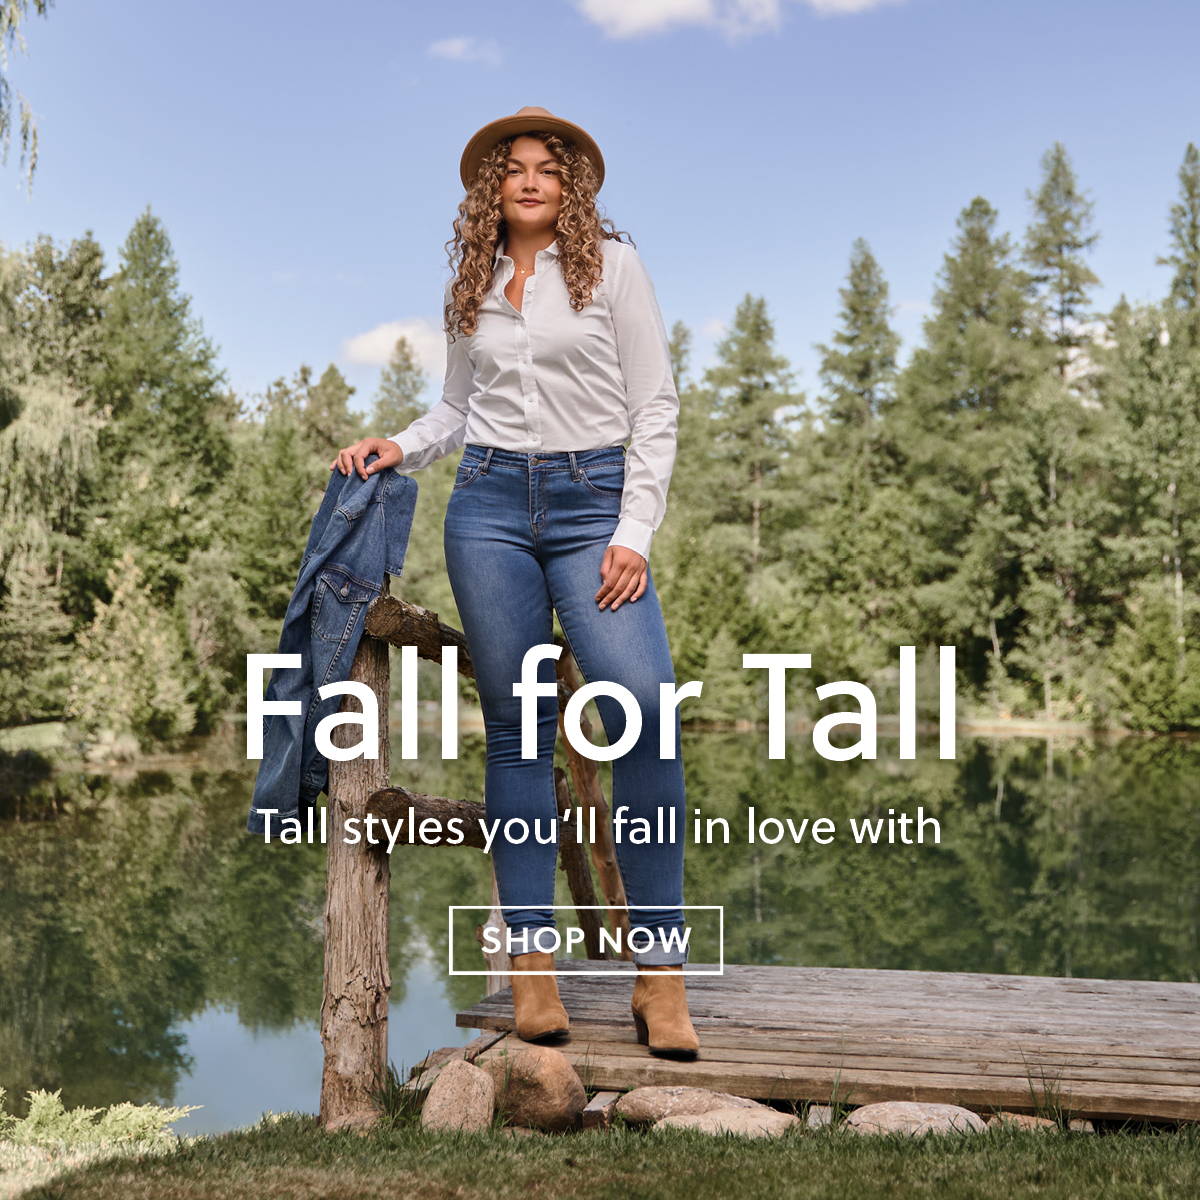 Fall for Tall. Shop styles you'll fall in love with by American Tall.